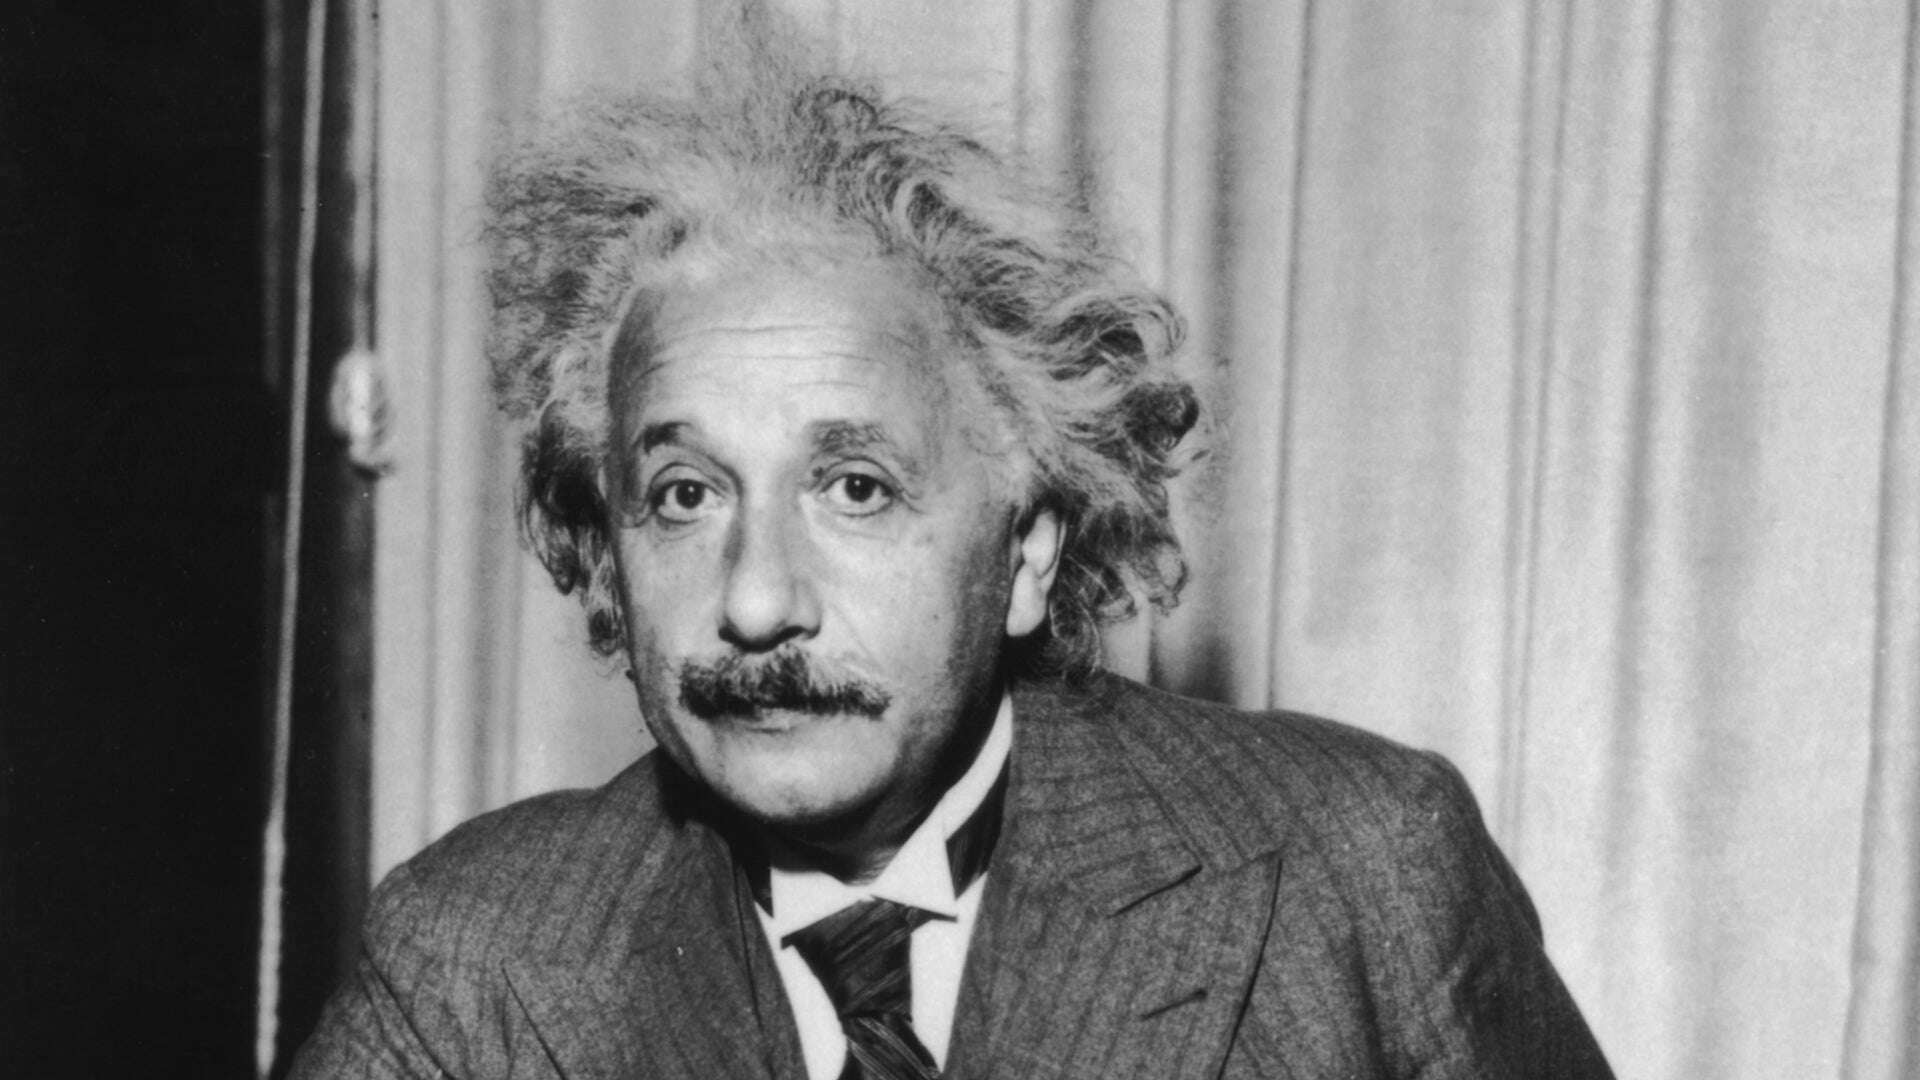 Famous People With Autism Spectrum Disorder - Albert Einstein - Theoretical Physicist